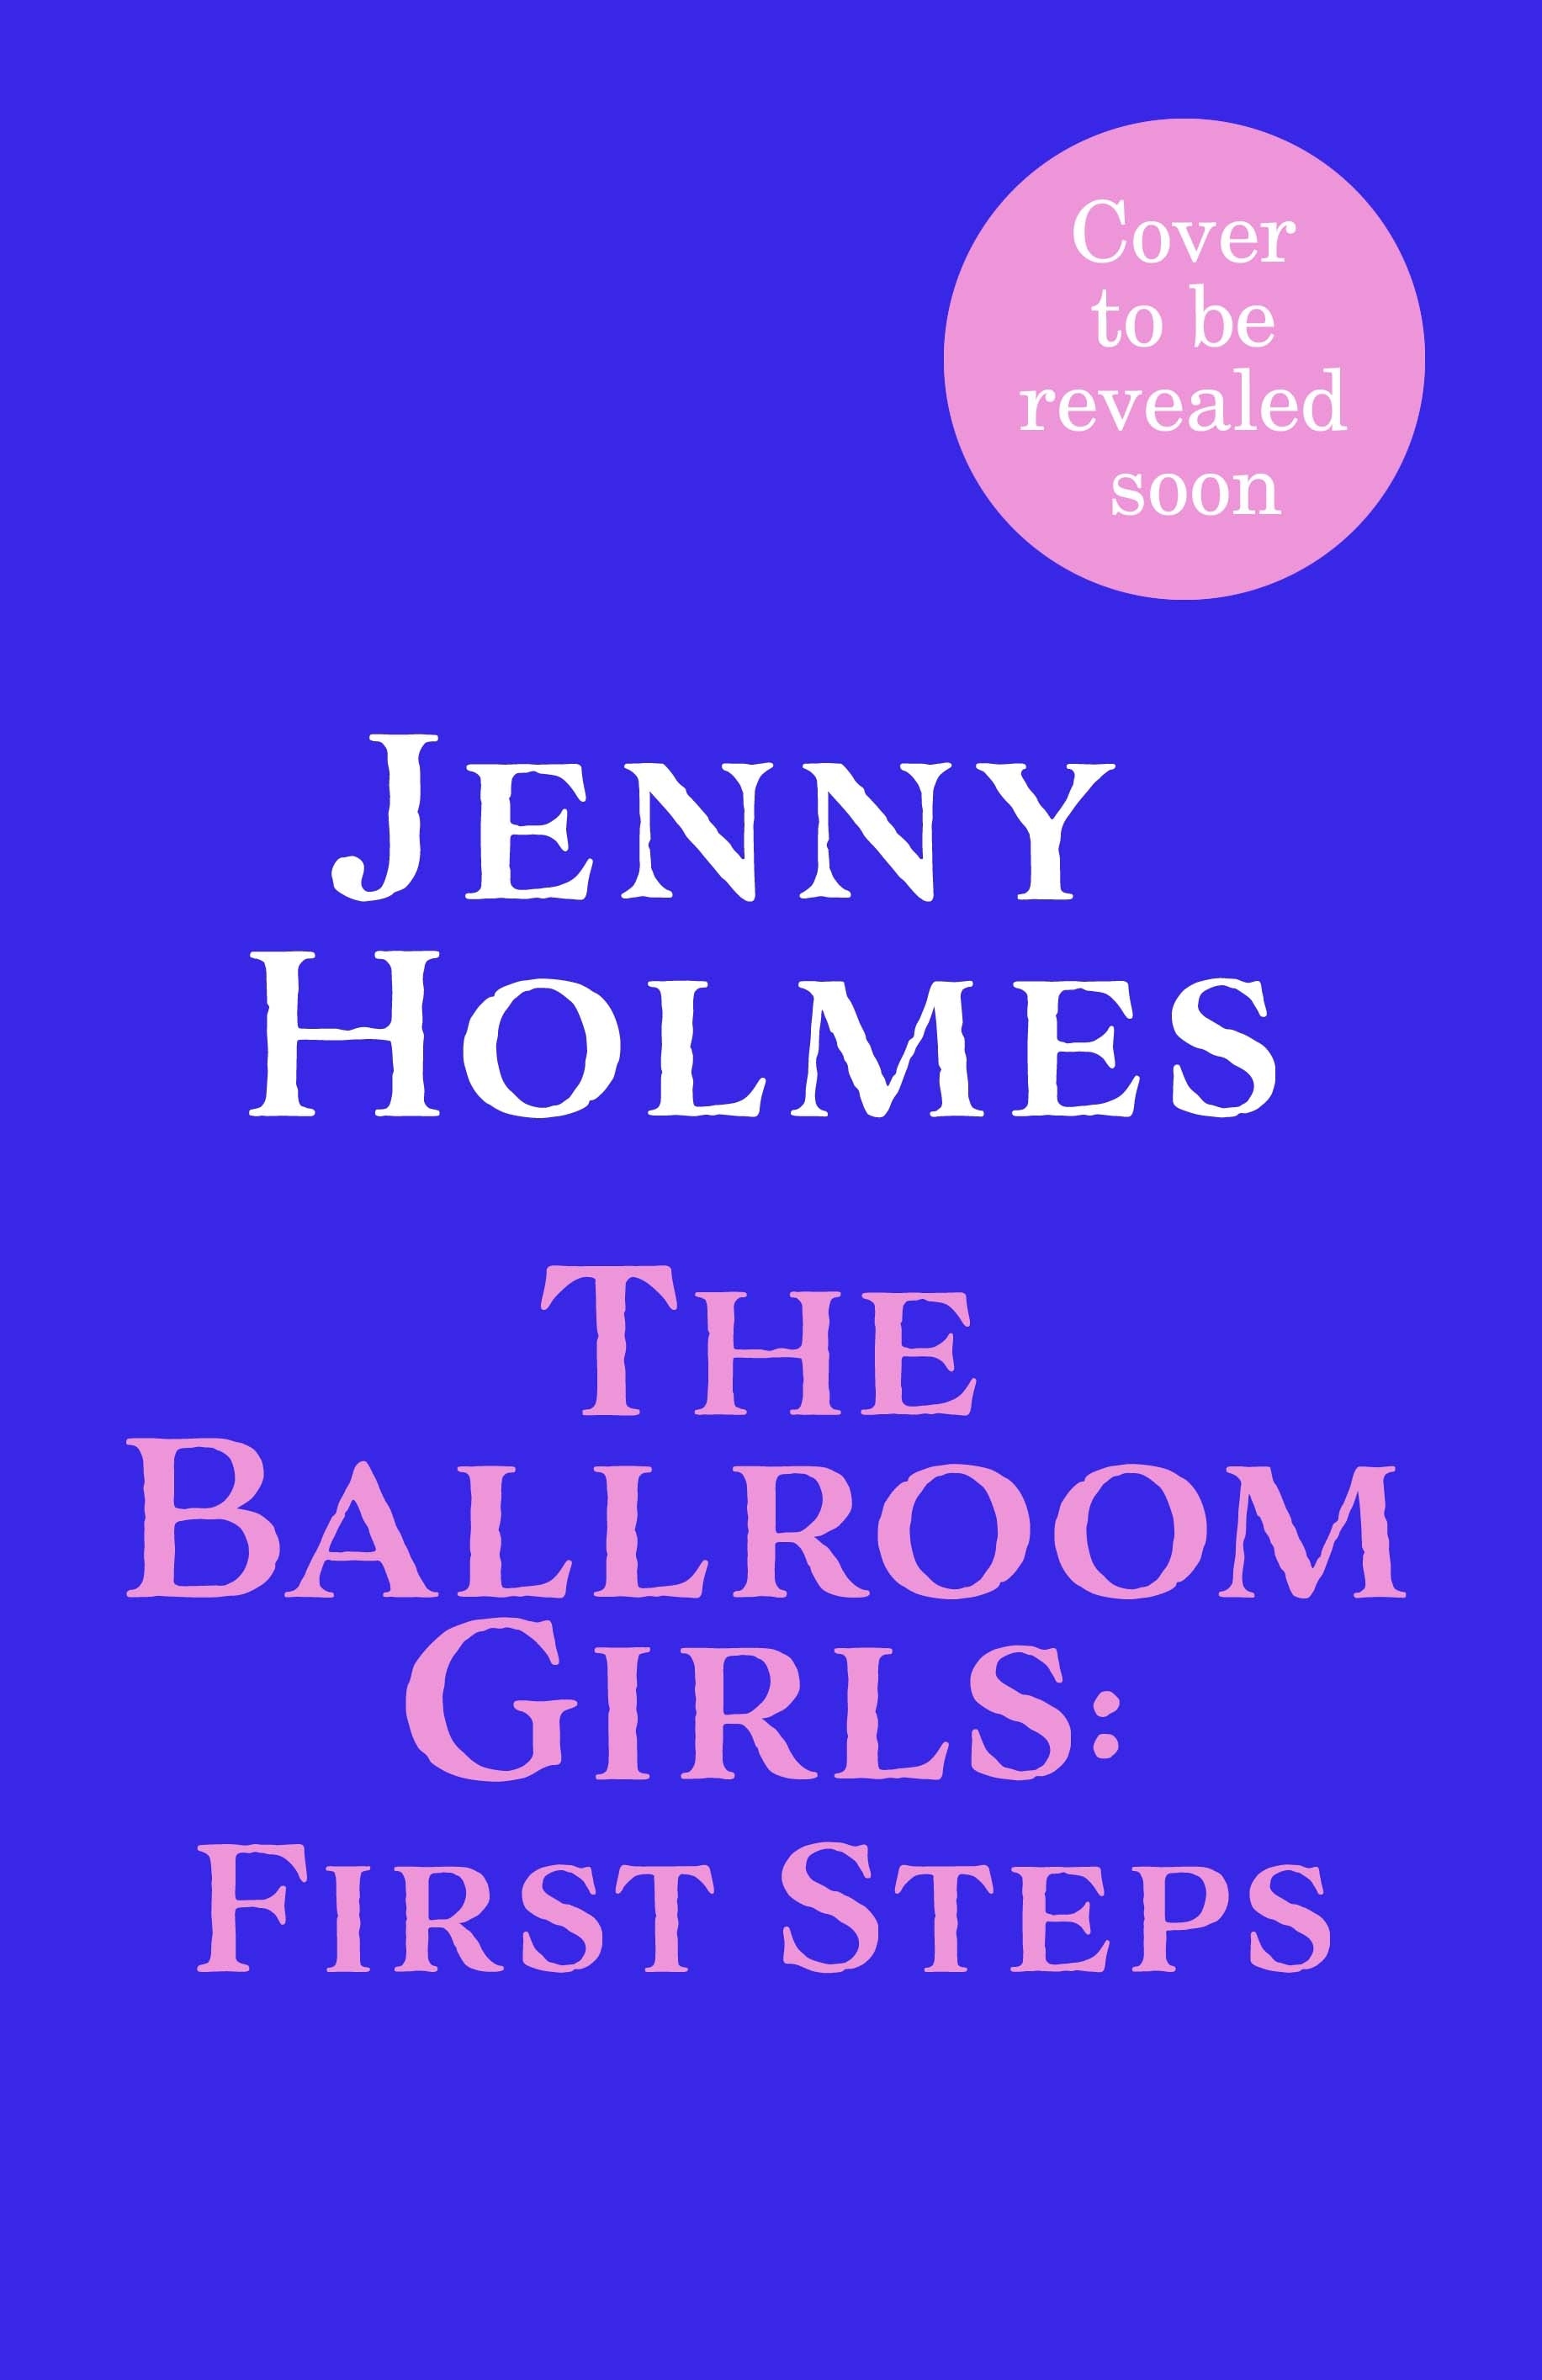 Book “The Ballroom Girls: First Steps” by Jenny Holmes — February 23, 2023